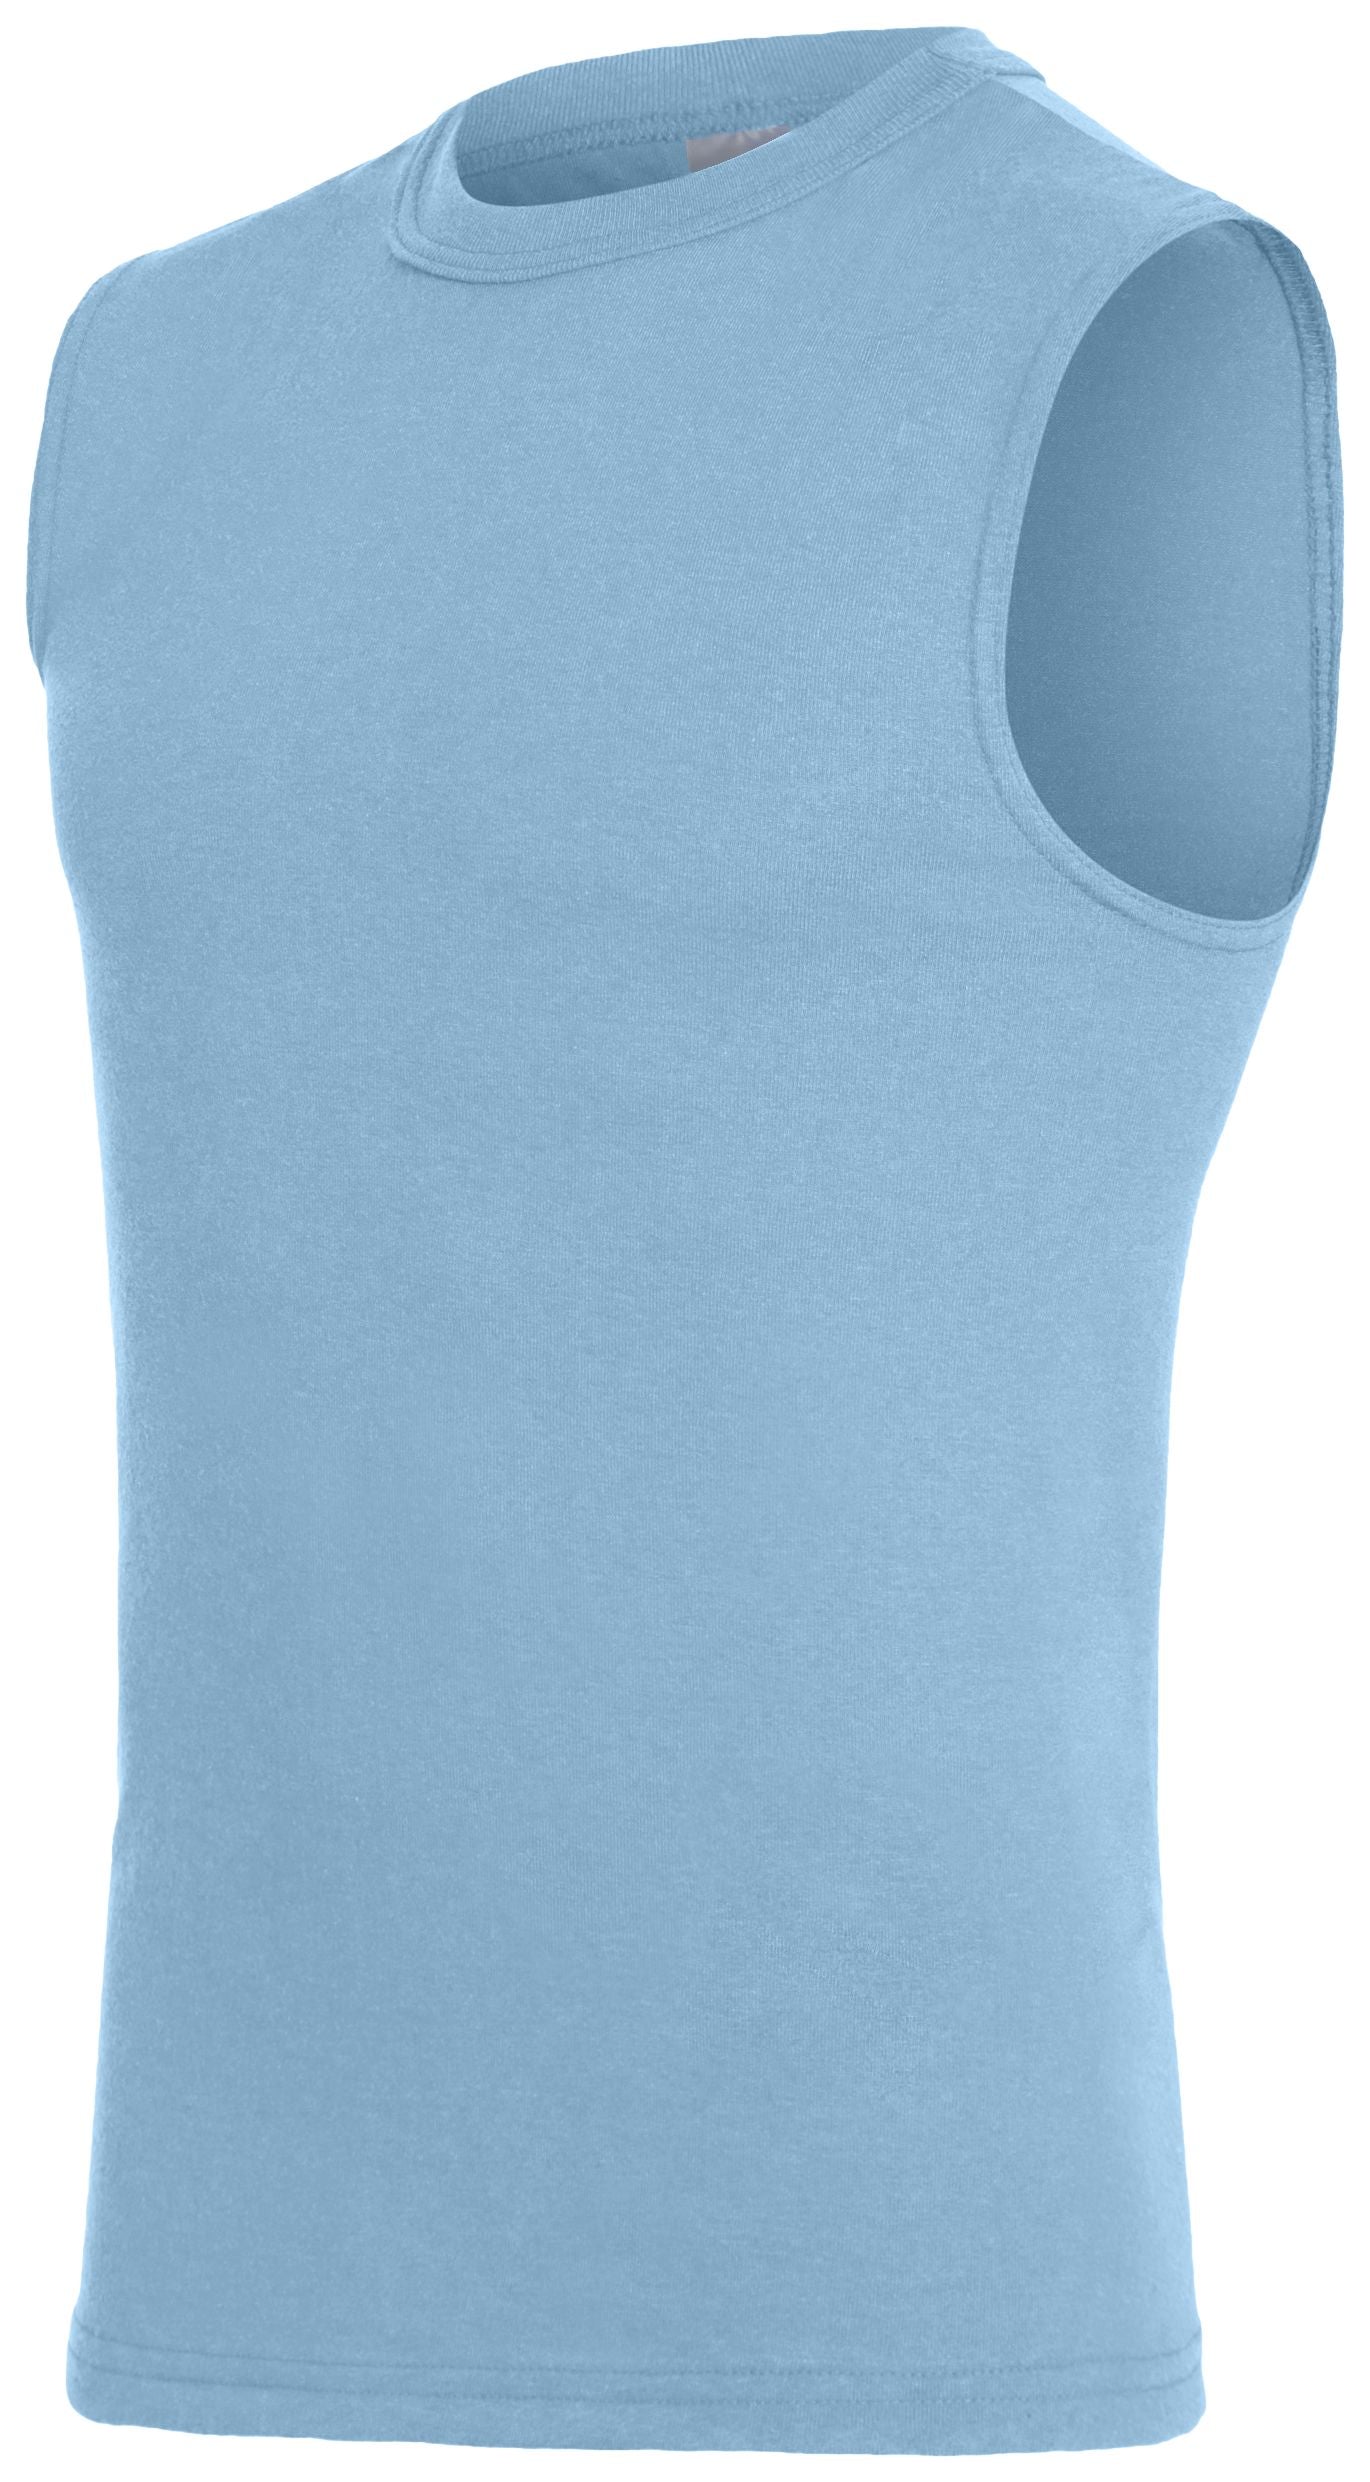 Augusta Sportswear Youth Shooter Shirt in Light Blue  -Part of the Youth, Youth-Jersey, Augusta-Products, Shirts product lines at KanaleyCreations.com